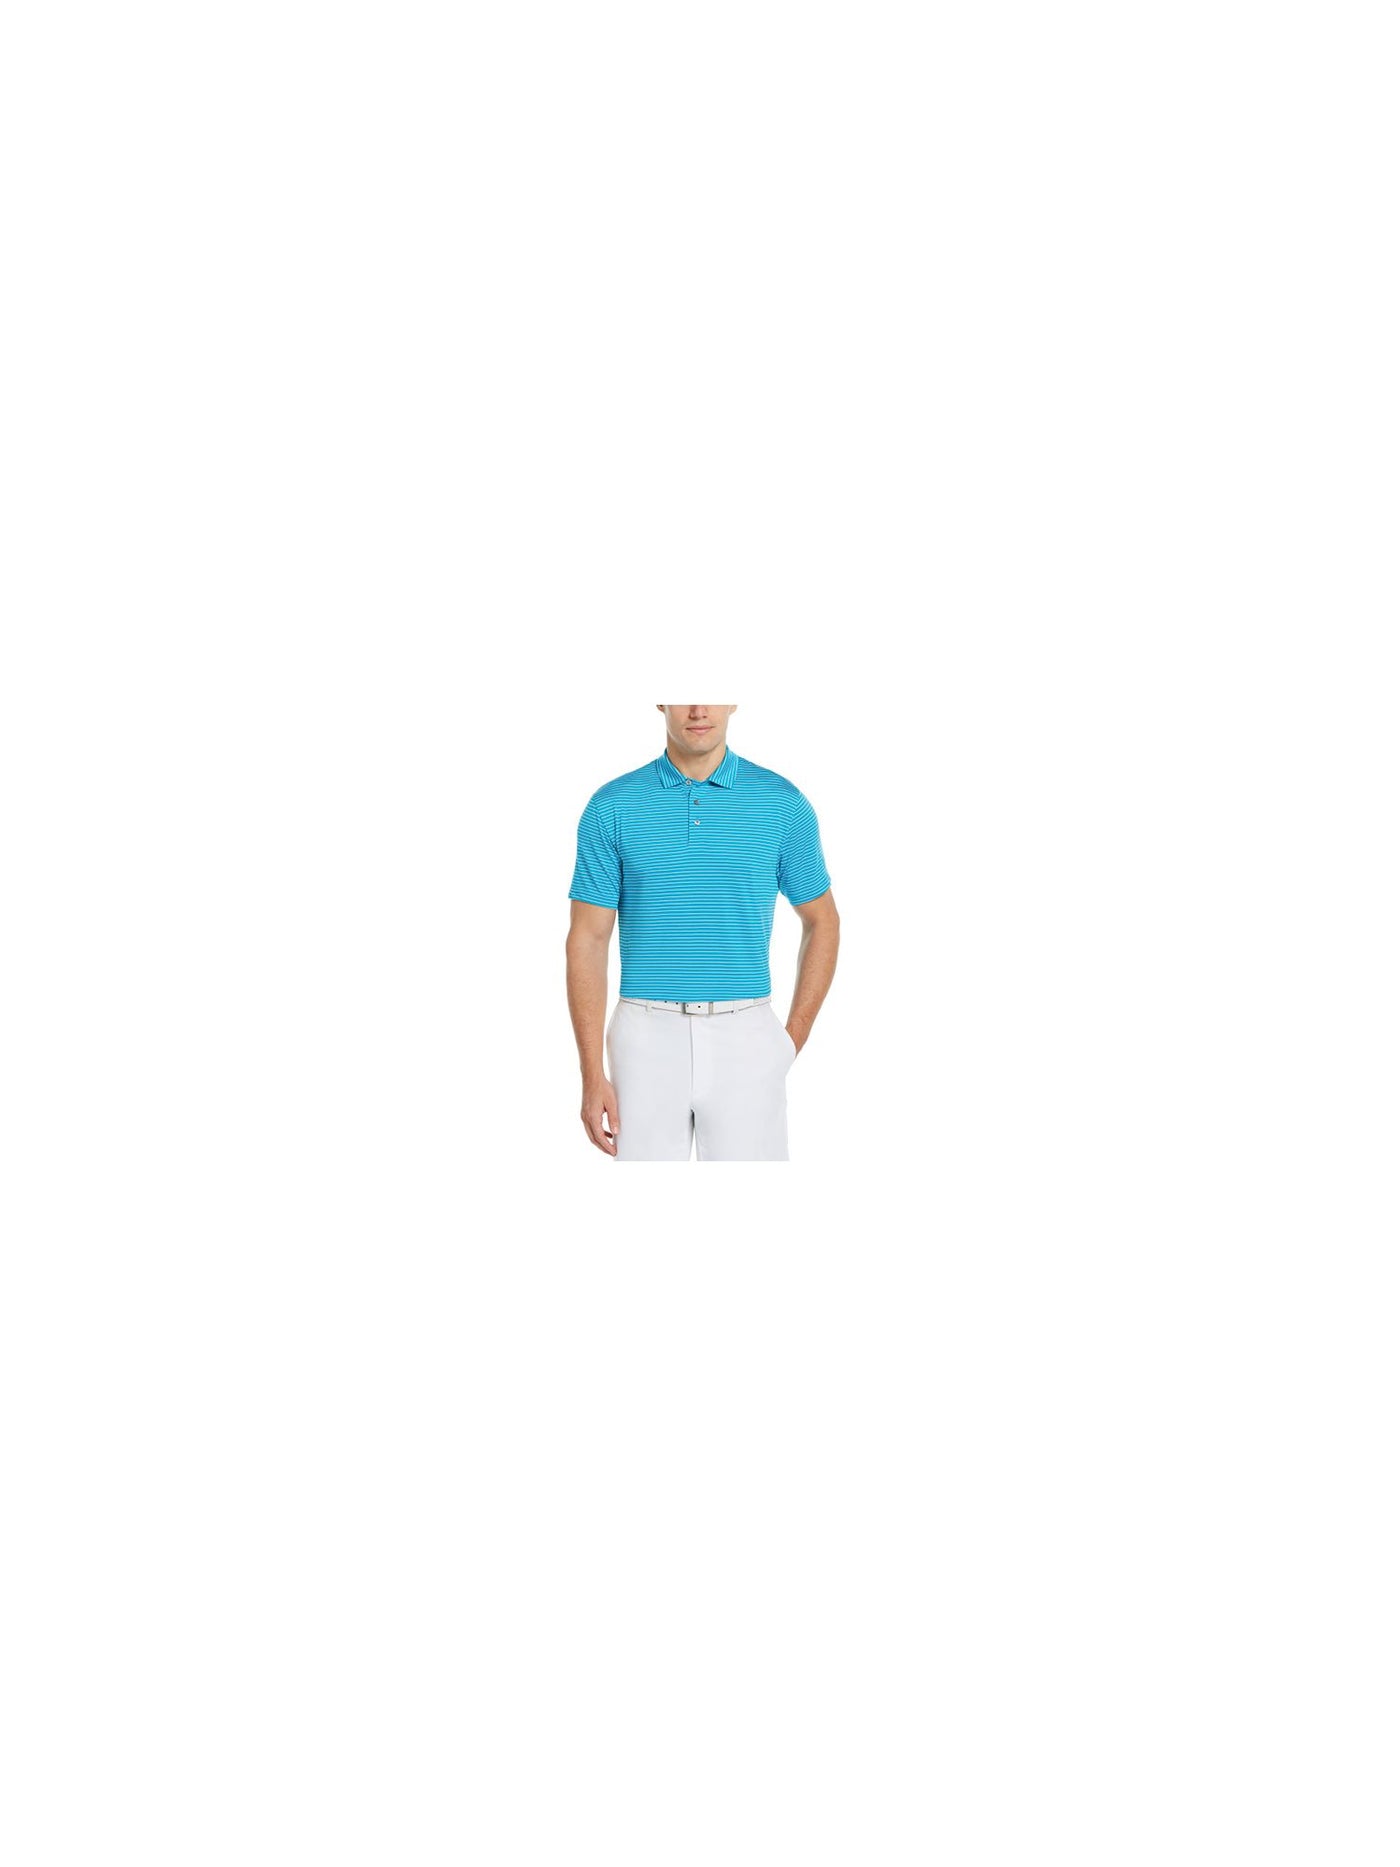 HYBRID APPAREL Mens Turquoise Athletic Fit Moisture Wicking Polo L